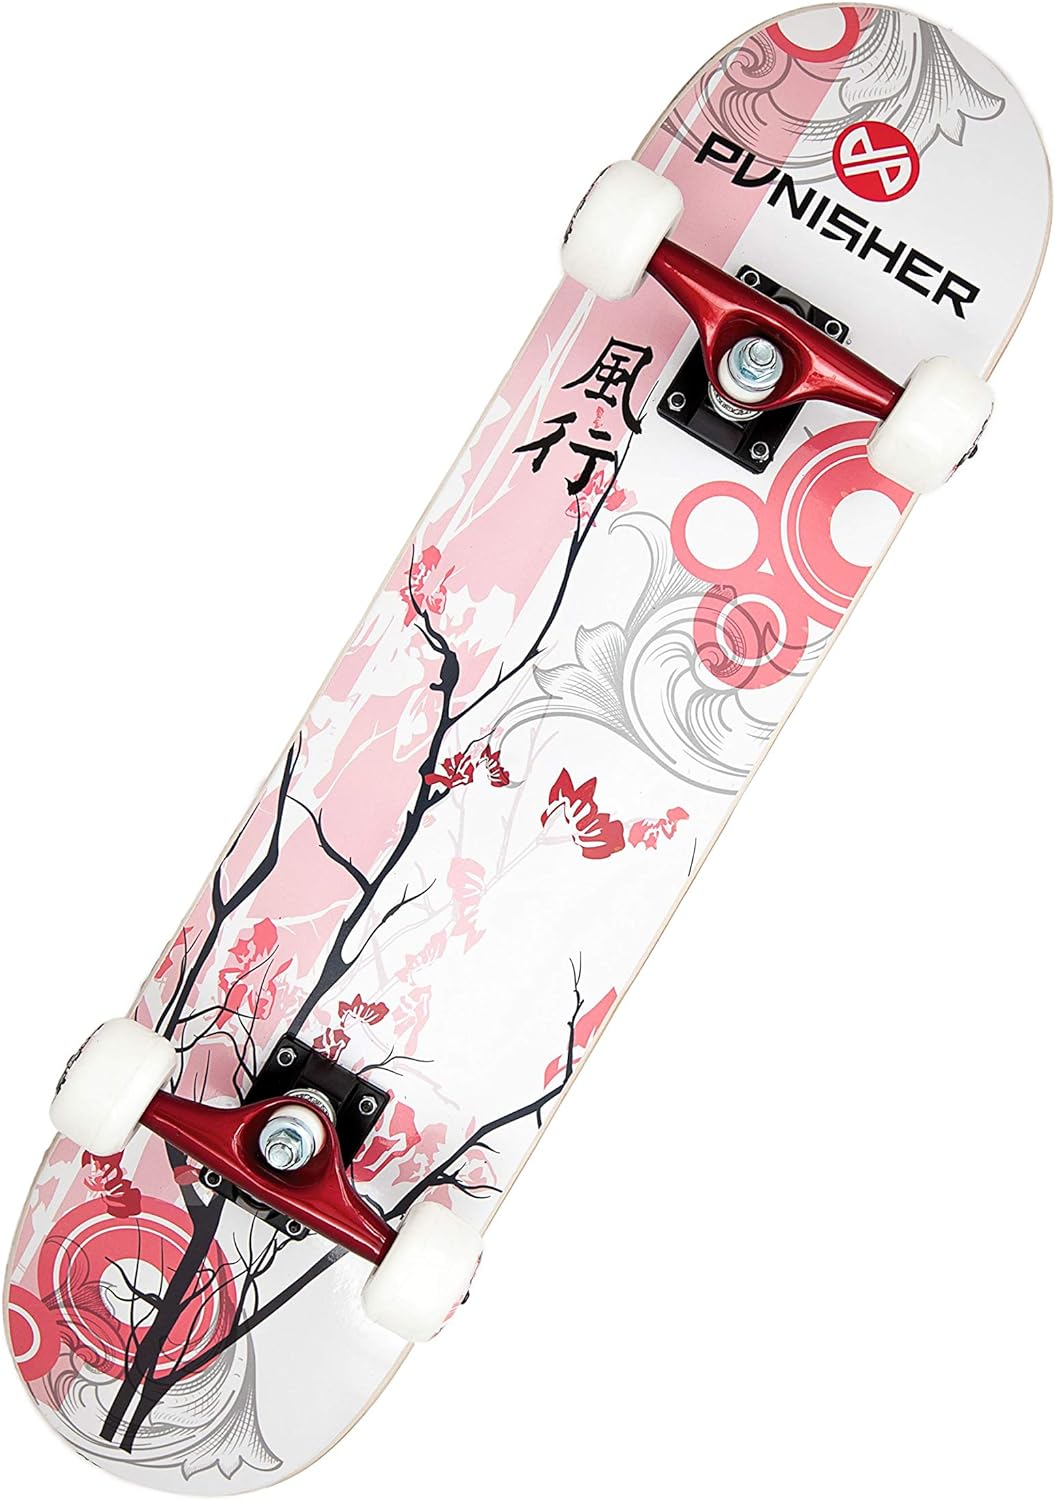 Punisher Girls Skateboard Complete with 31.5 x 7.75 Double Kick Concave Deck Canadian Maple ABEC-7 Bearings